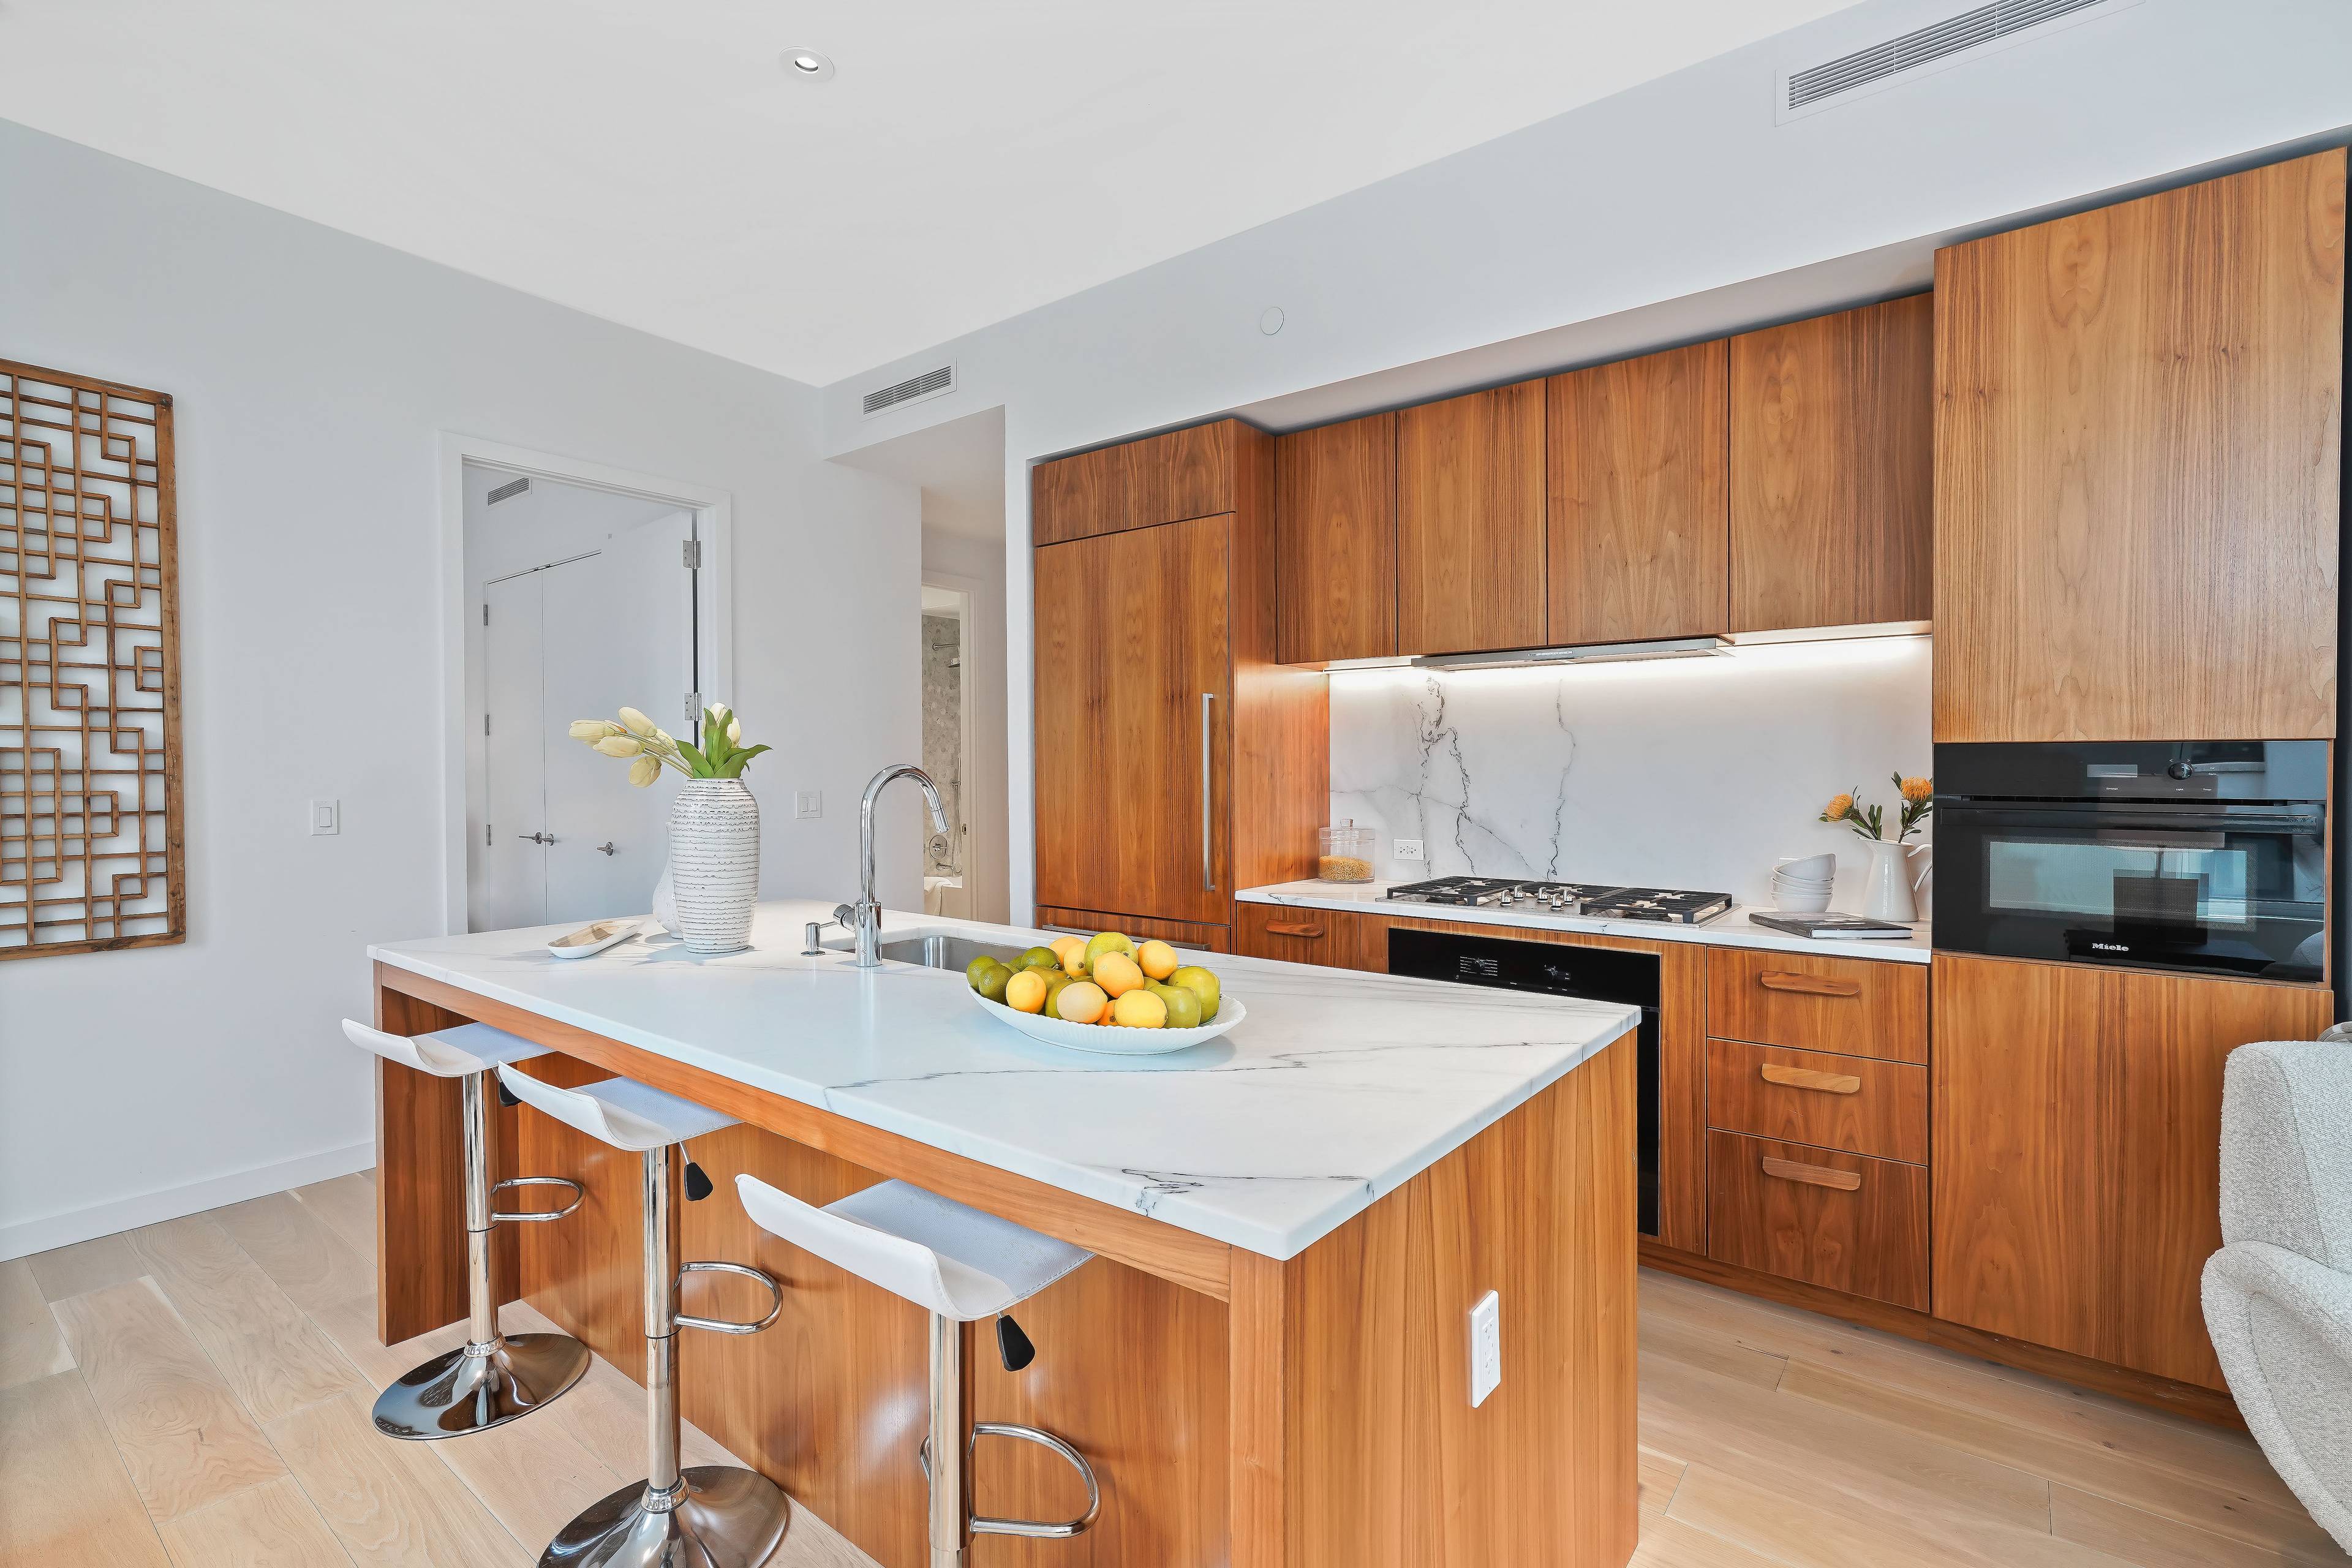 Luxuriously spacious with beautiful finishes and abundant natural light, this 1, 645 sq ft condo comes with a licensed, valet parking spot a rare find in prime Boerum Hill.